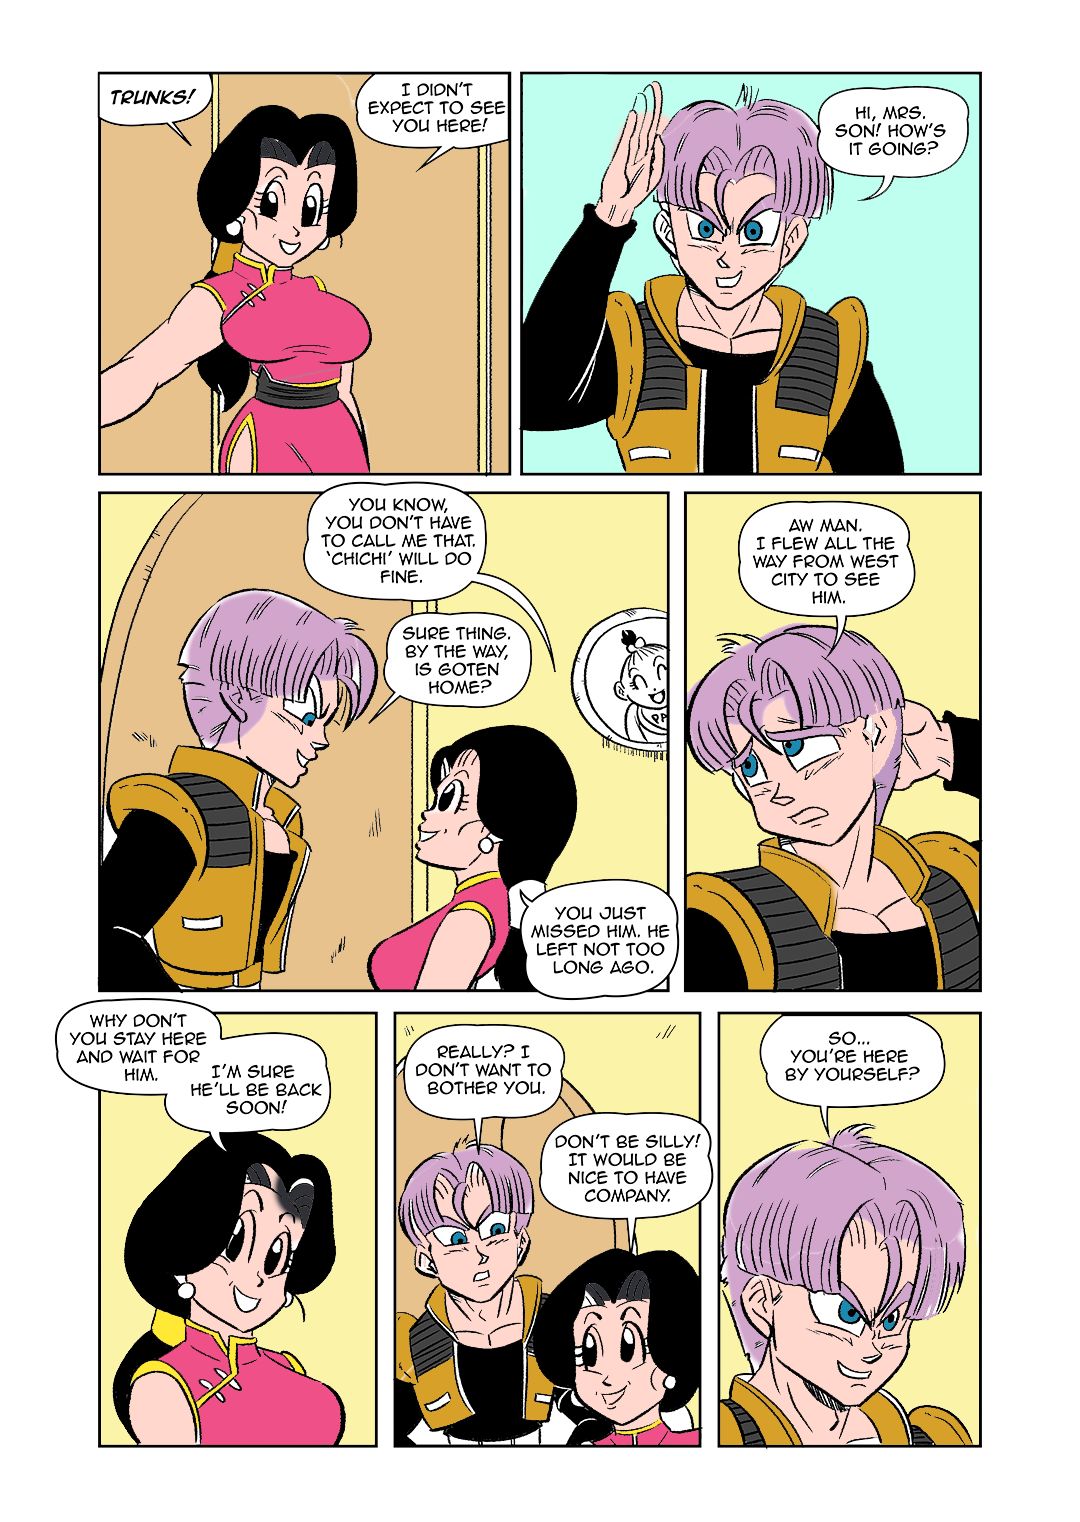 The Switch Up (Dragon Ball Z) by Funsexydb page 3